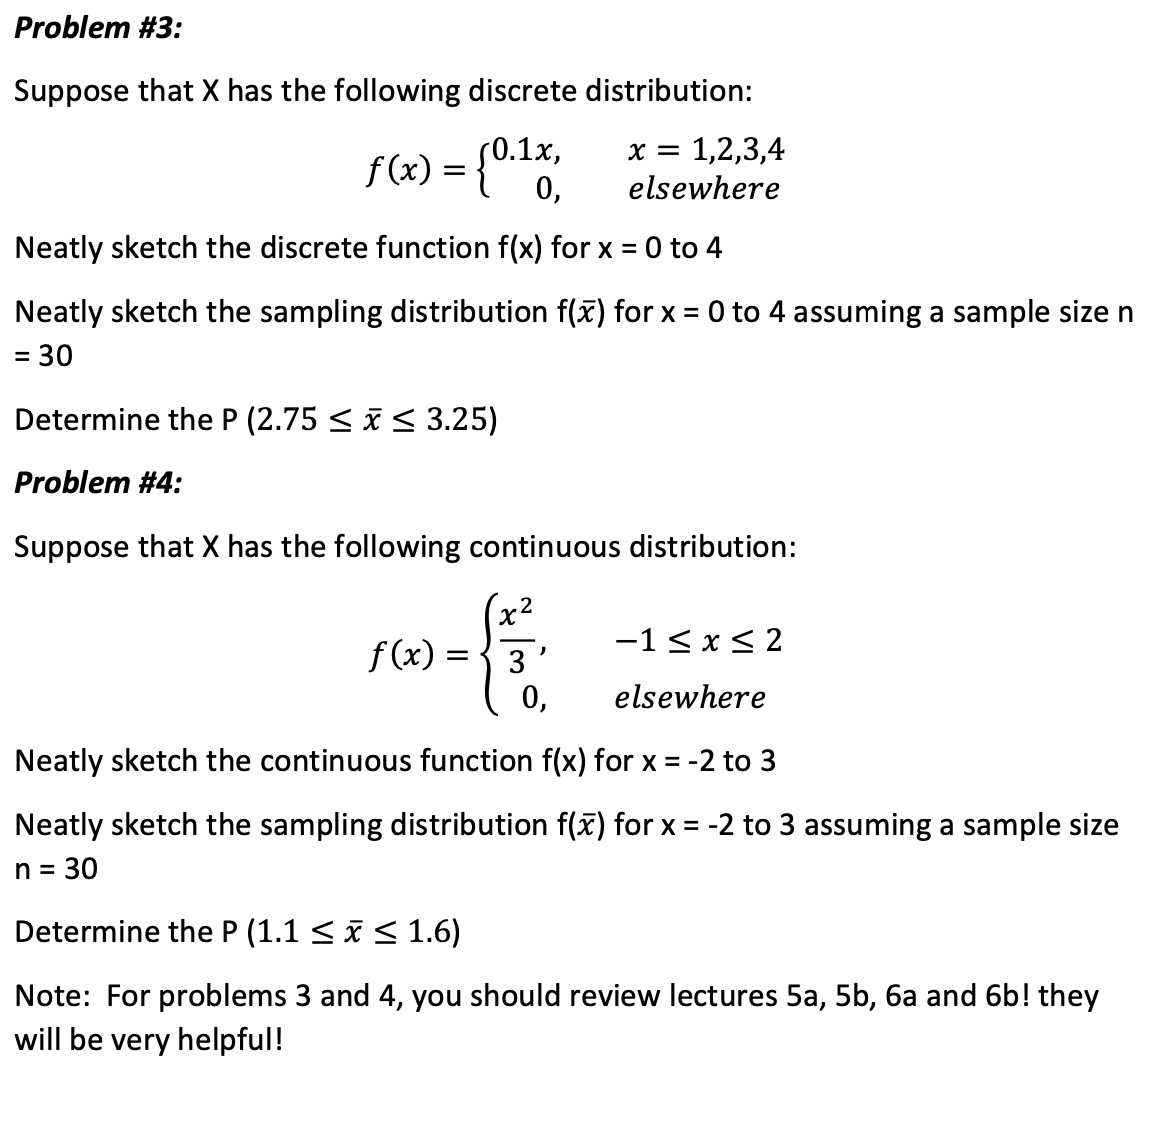 Problem #3:
Suppose that X has the following discrete distribution:
f(x) = {0.1x,
= 1,2,3,4
elsewhere
Neatly sketch the discrete function f(x) for x = 0 to 4
Neatly sketch the sampling distribution f(x) for x = 0 to 4 assuming a sample size n
= 30
=
Determine the P (2.75 ≤ x ≤ 3.25)
Problem #4:
Suppose that X has the following continuous distribution:
f(x):
X
=
X =
2
−1≤ x ≤ 2
0,
elsewhere
Neatly sketch the continuous function f(x) for x = -2 to 3
Neatly sketch the sampling distribution f(x) for x = -2 to 3 assuming a sample size
n = 30
Determine the P (1.1 ≤ x ≤ 1.6)
Note: For problems 3 and 4, you should review lectures 5a, 5b, 6a and 6b! they
will be very helpful!